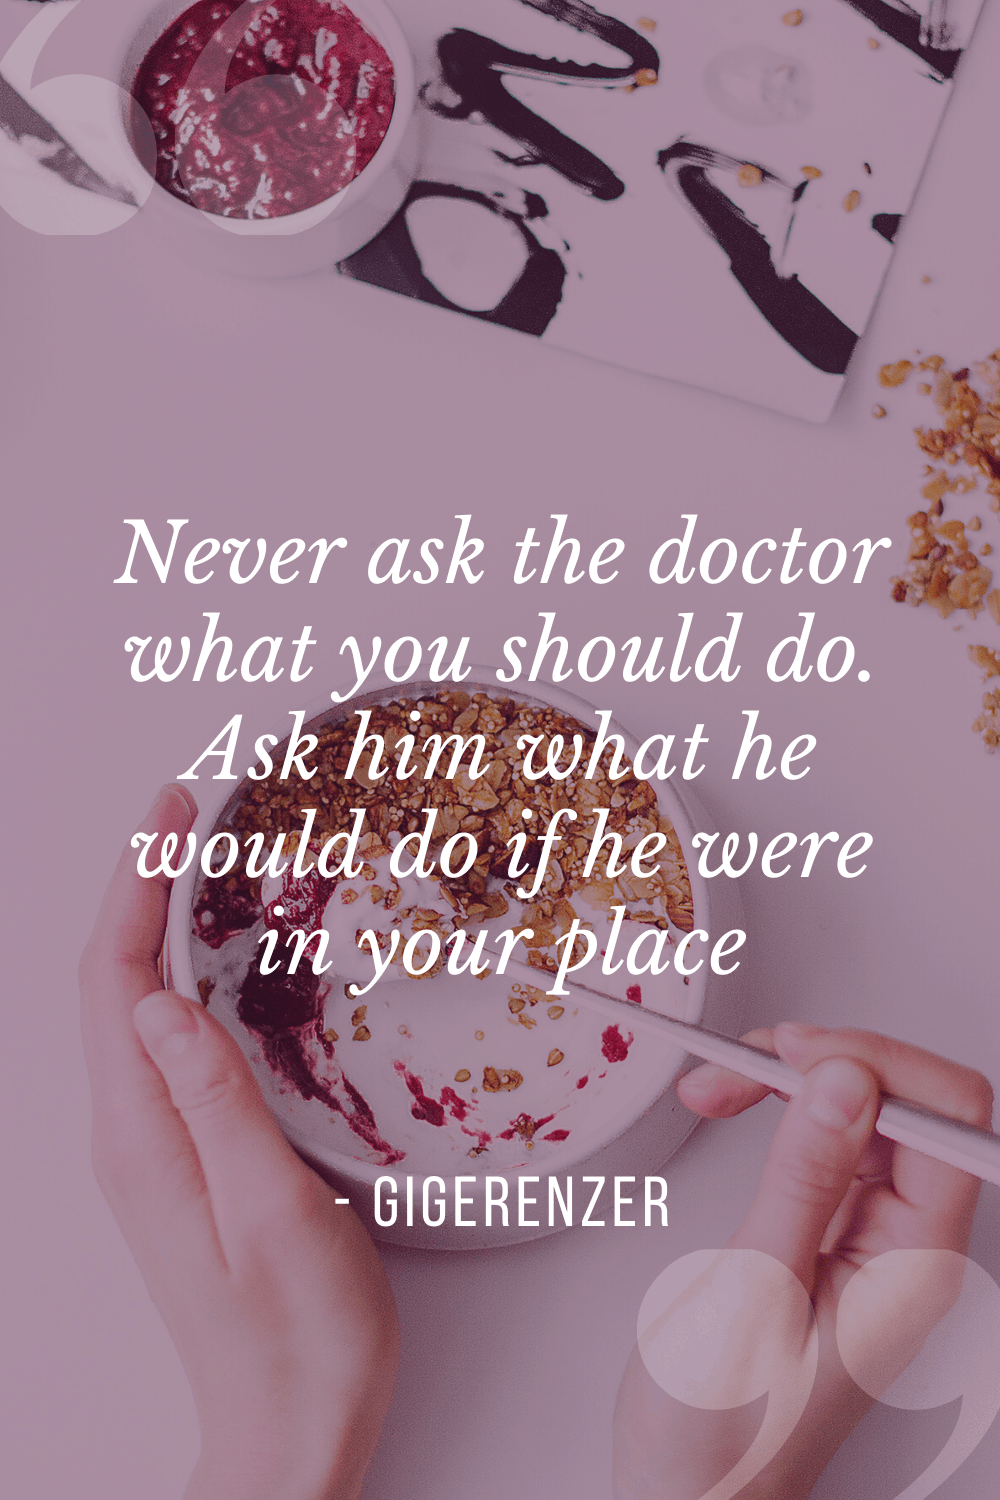 “Never ask the doctor what you should do. Ask him what he would do if he were in your place”, Gerd Gigerenzer